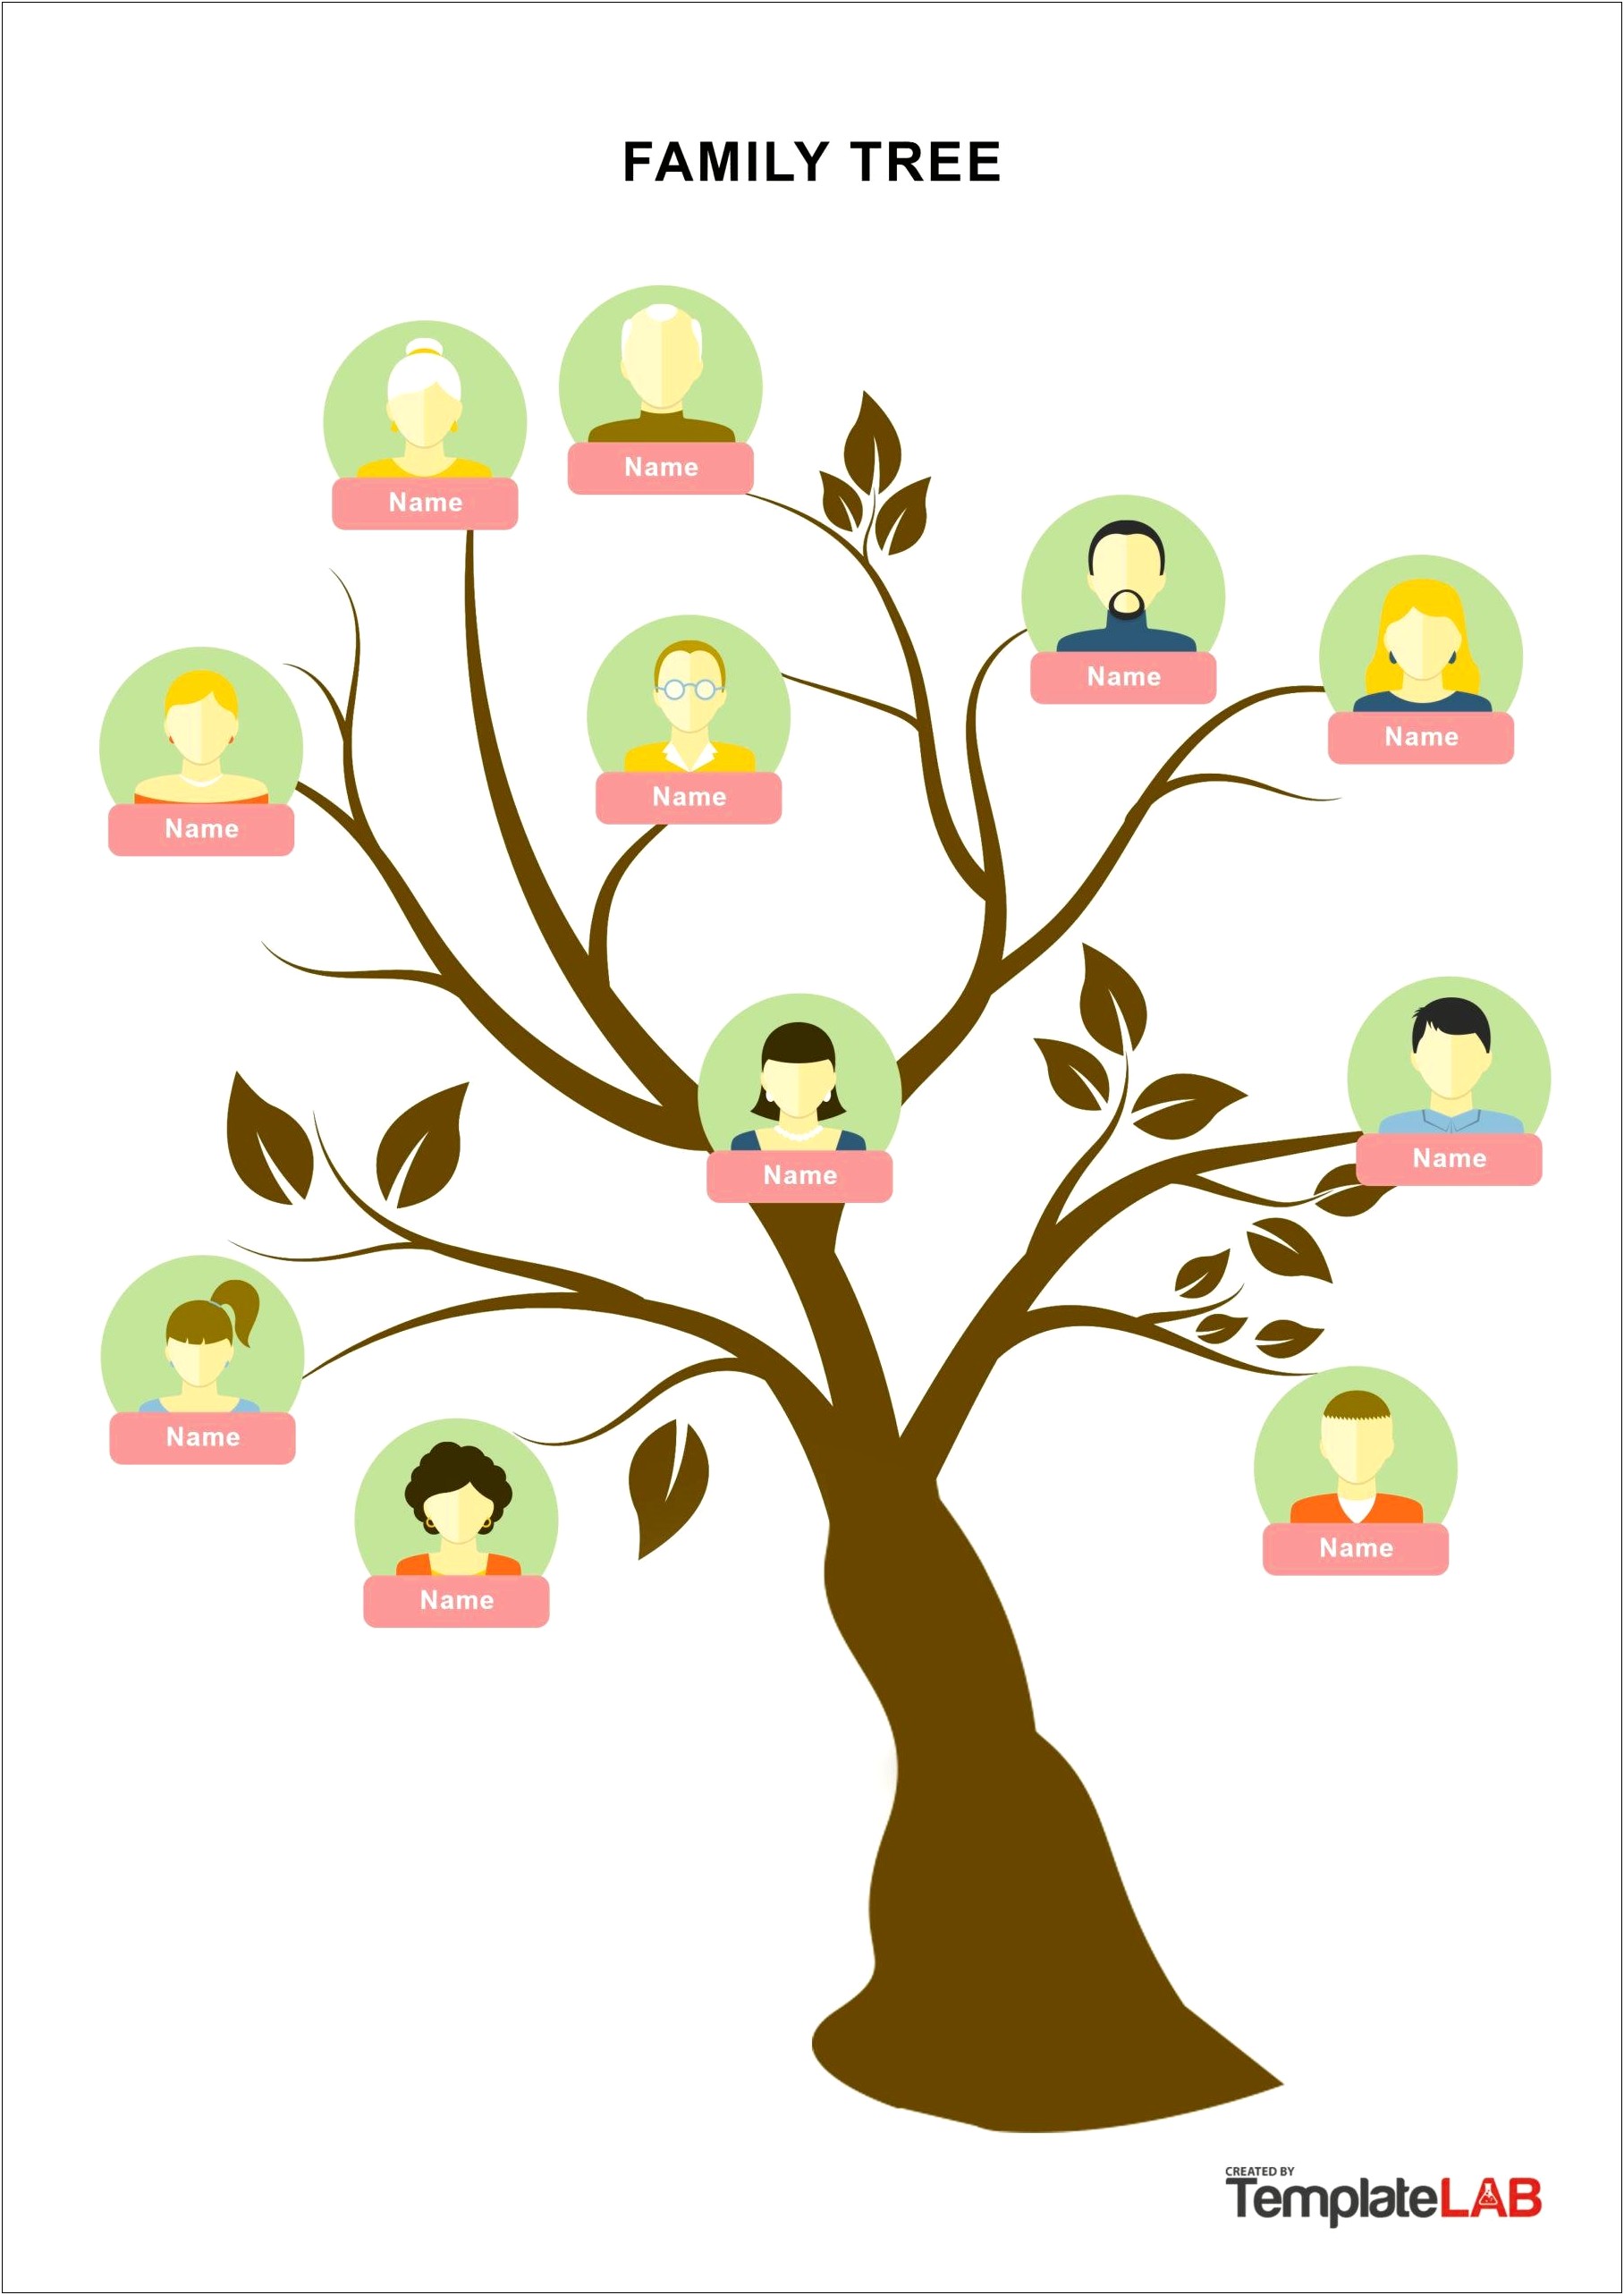 Family Tree Template Free Download Mac